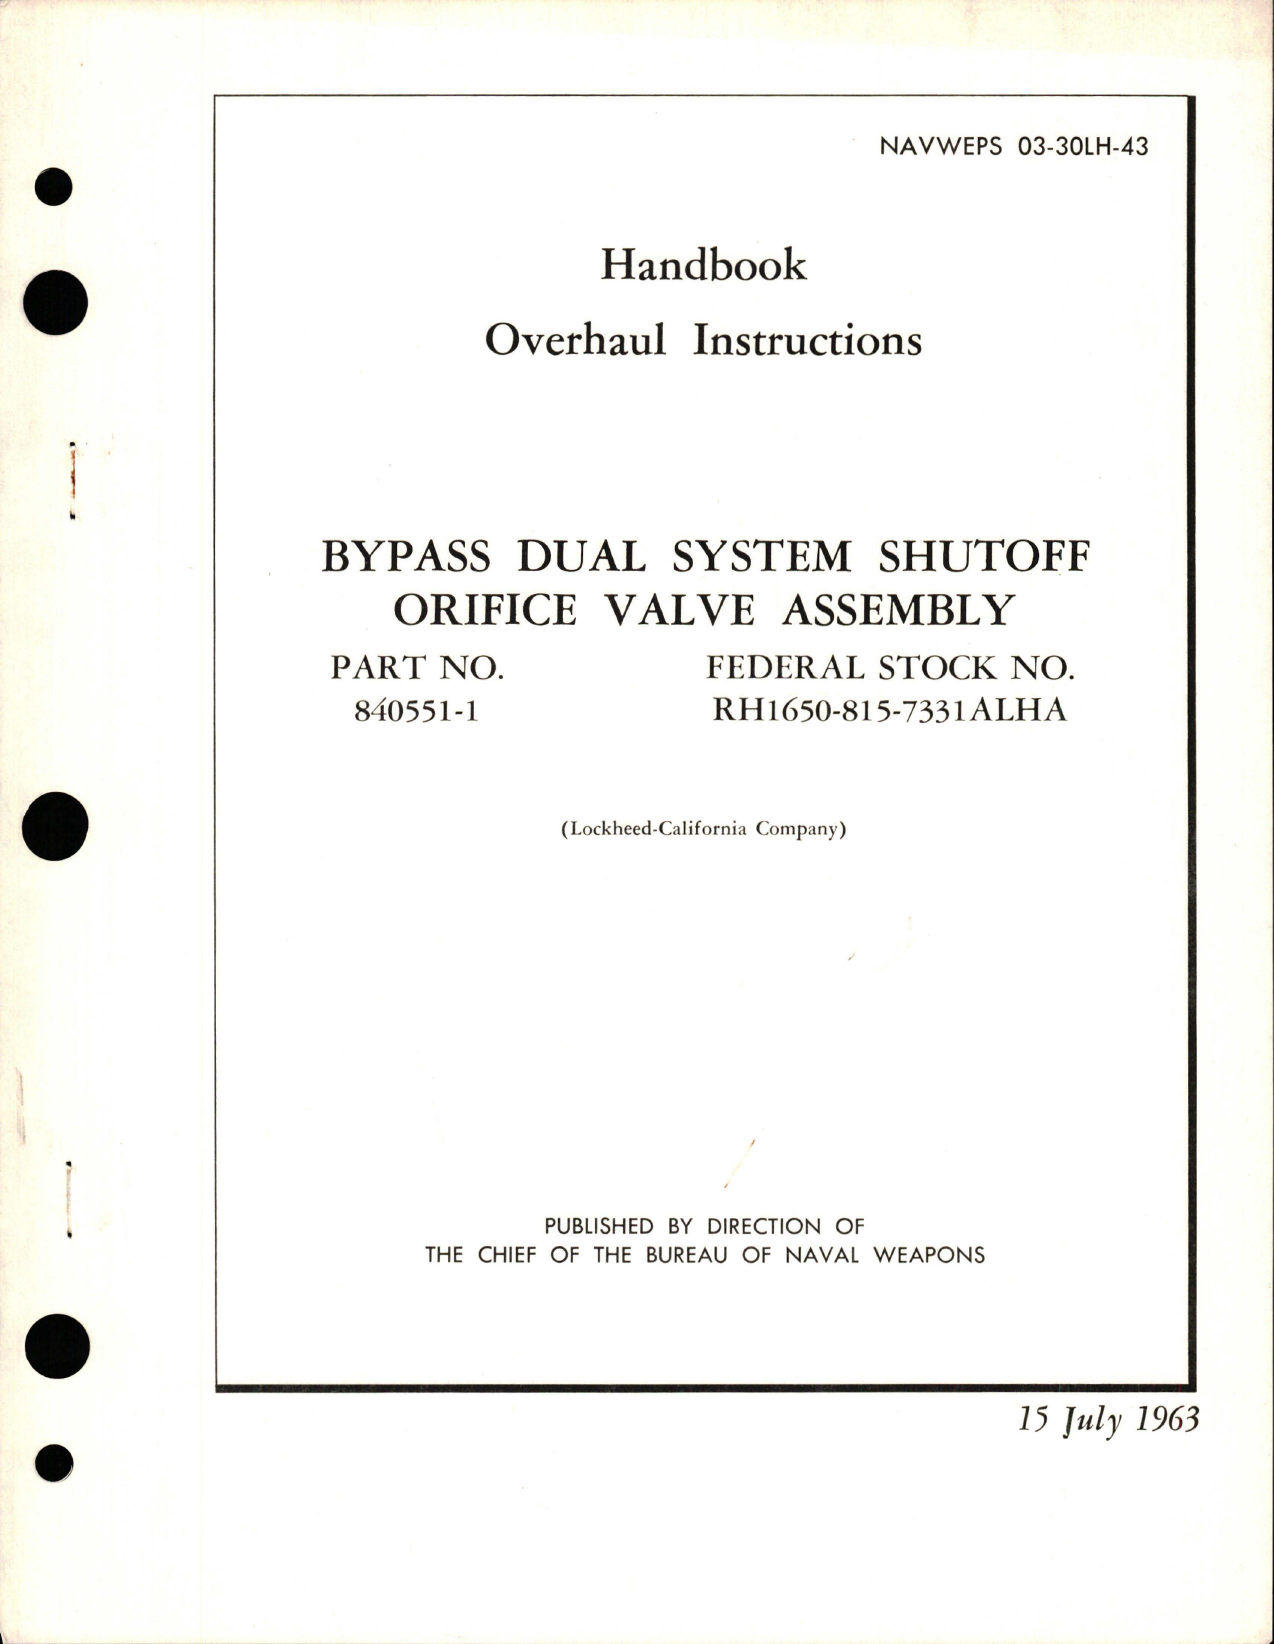 Sample page 1 from AirCorps Library document: Overhaul Instructions for Bypass Dual System Shutoff Orifice Valve Assembly - Part 840551-1 